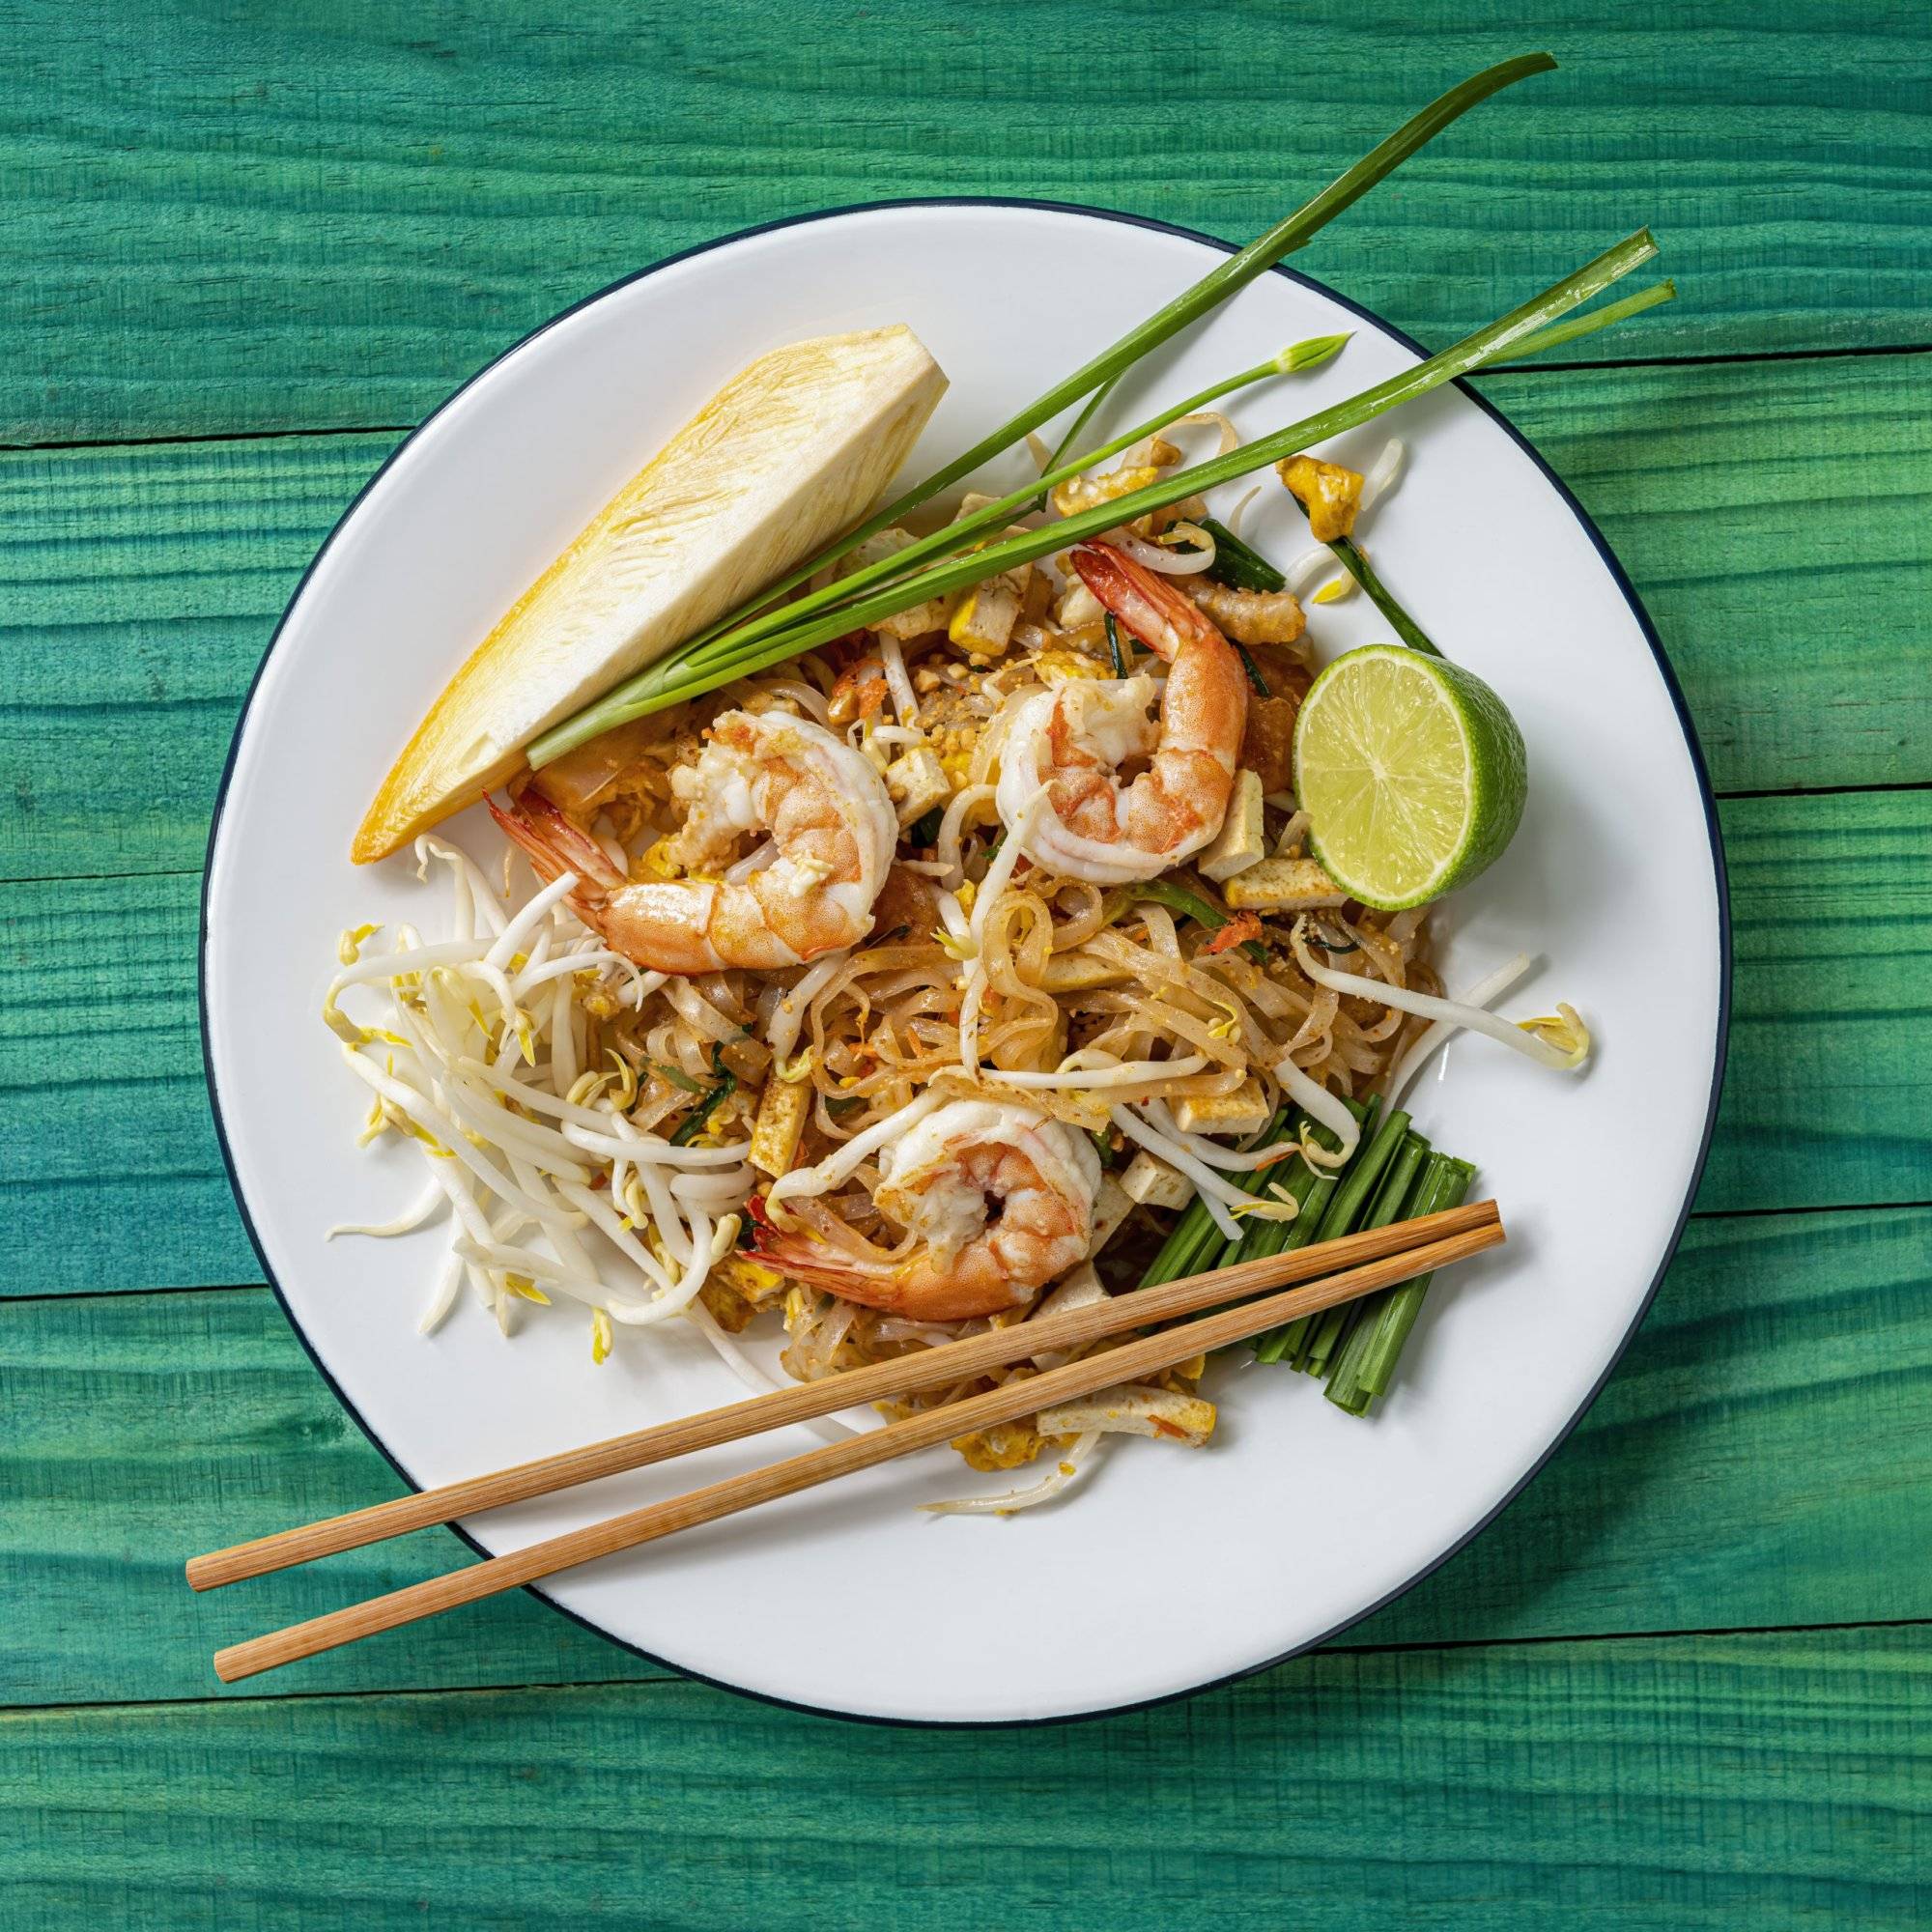 World famous freshly stir-fried cooked, Thai recipe of Prawn Pad Thai noodles on a round traditional enameled metal dish with chopsticks laid on the side of the dish, set on an abstract weathered turquoise colored wood panel table background.